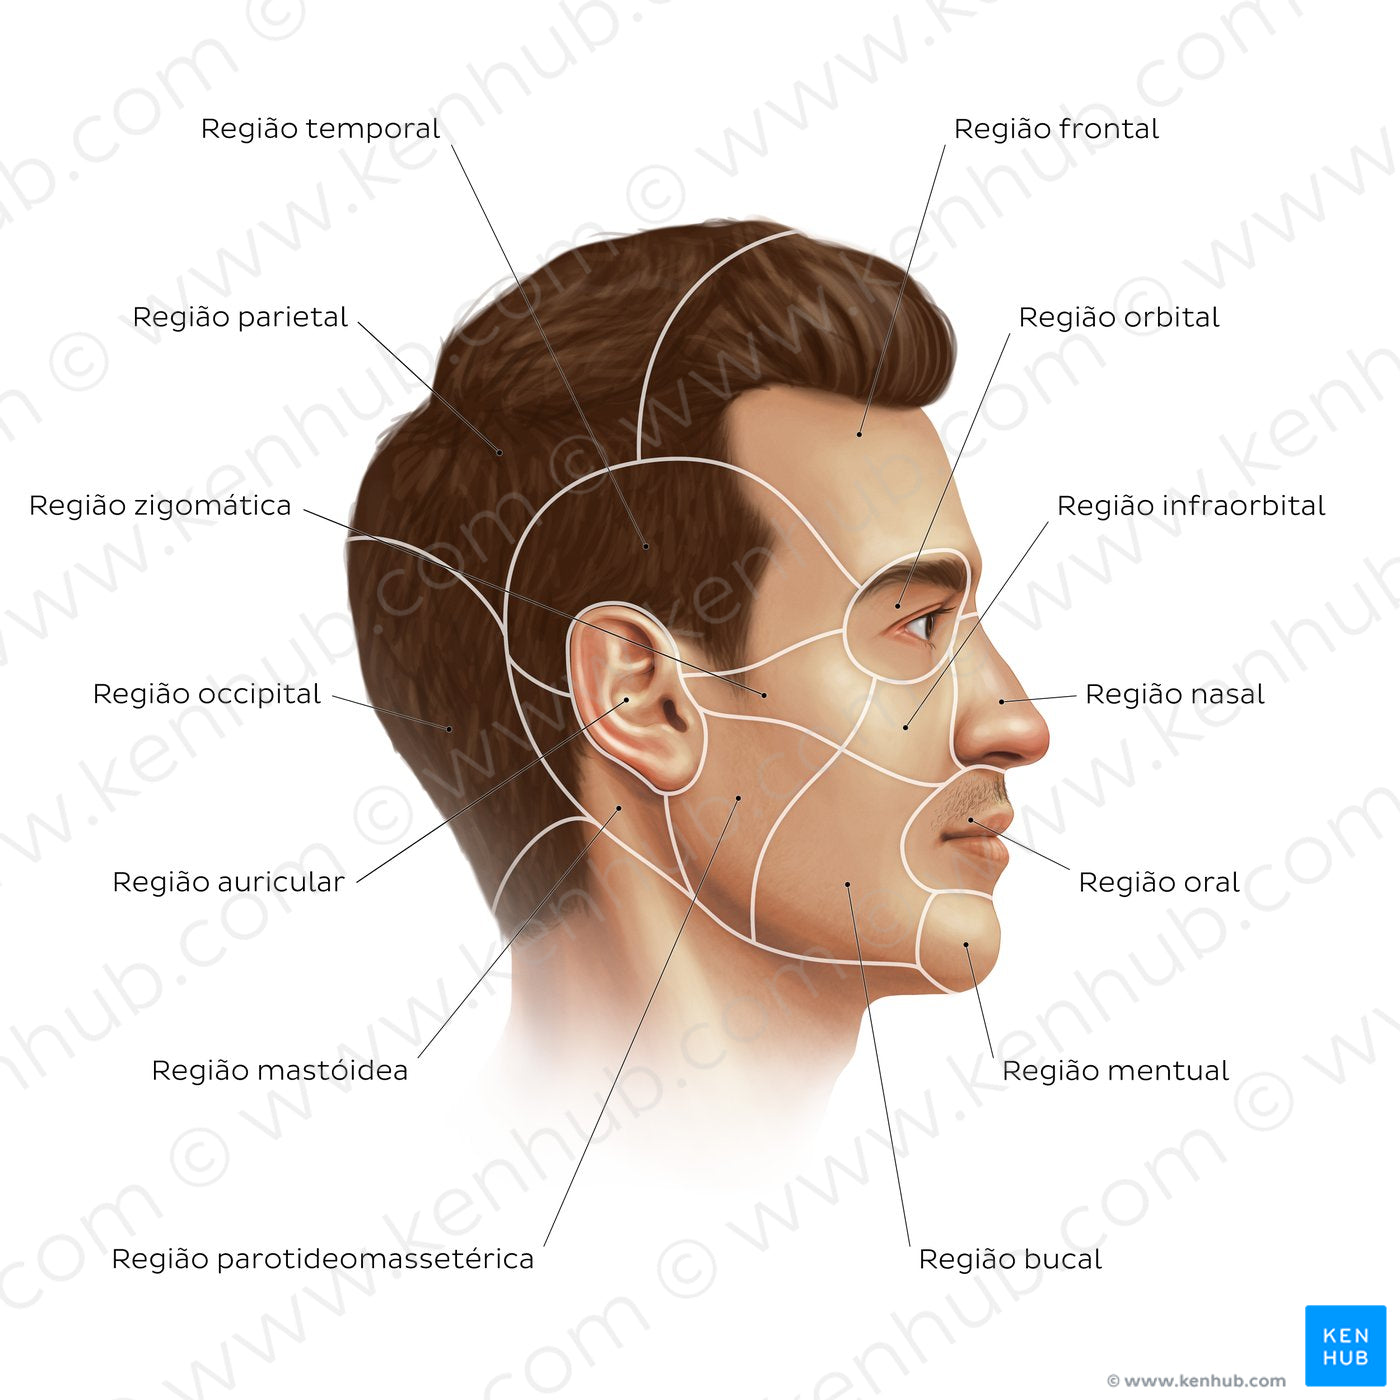 Regions of the head and face (Portuguese)